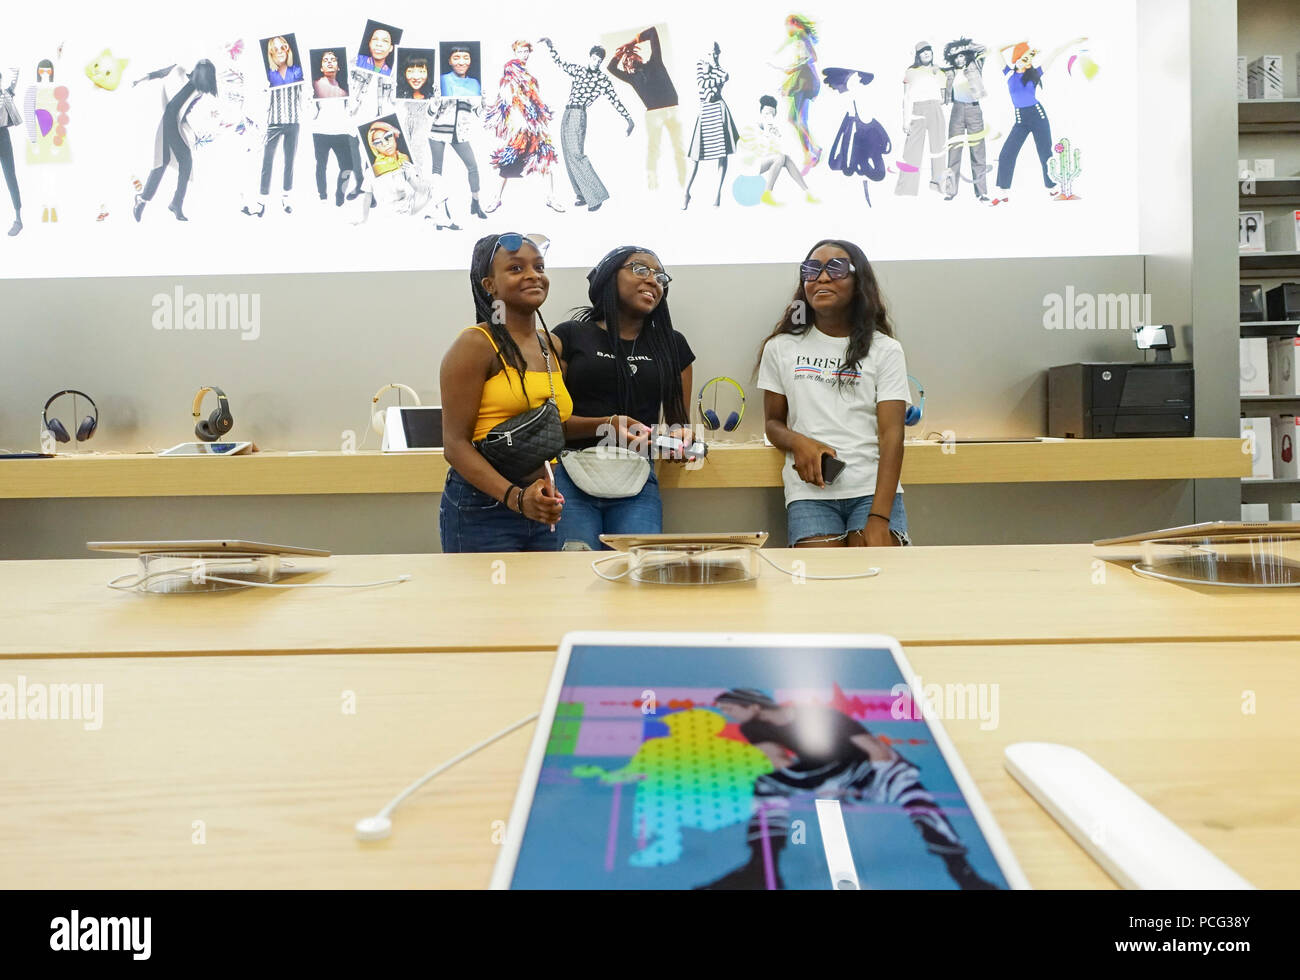 New York, USA. 2nd Aug, 2018. Customers are seen at an Apple store in New York, the United States, Aug. 2, 2018. U.S. tech giant Apple became the first American company that saw its market cap hit 1 trillion U.S. dollars in the U.S. history after its shares rose 2.8 percent to a session high of 207.05 dollars around midday trading on Thursday. Credit: Wang Ying/Xinhua/Alamy Live News Stock Photo